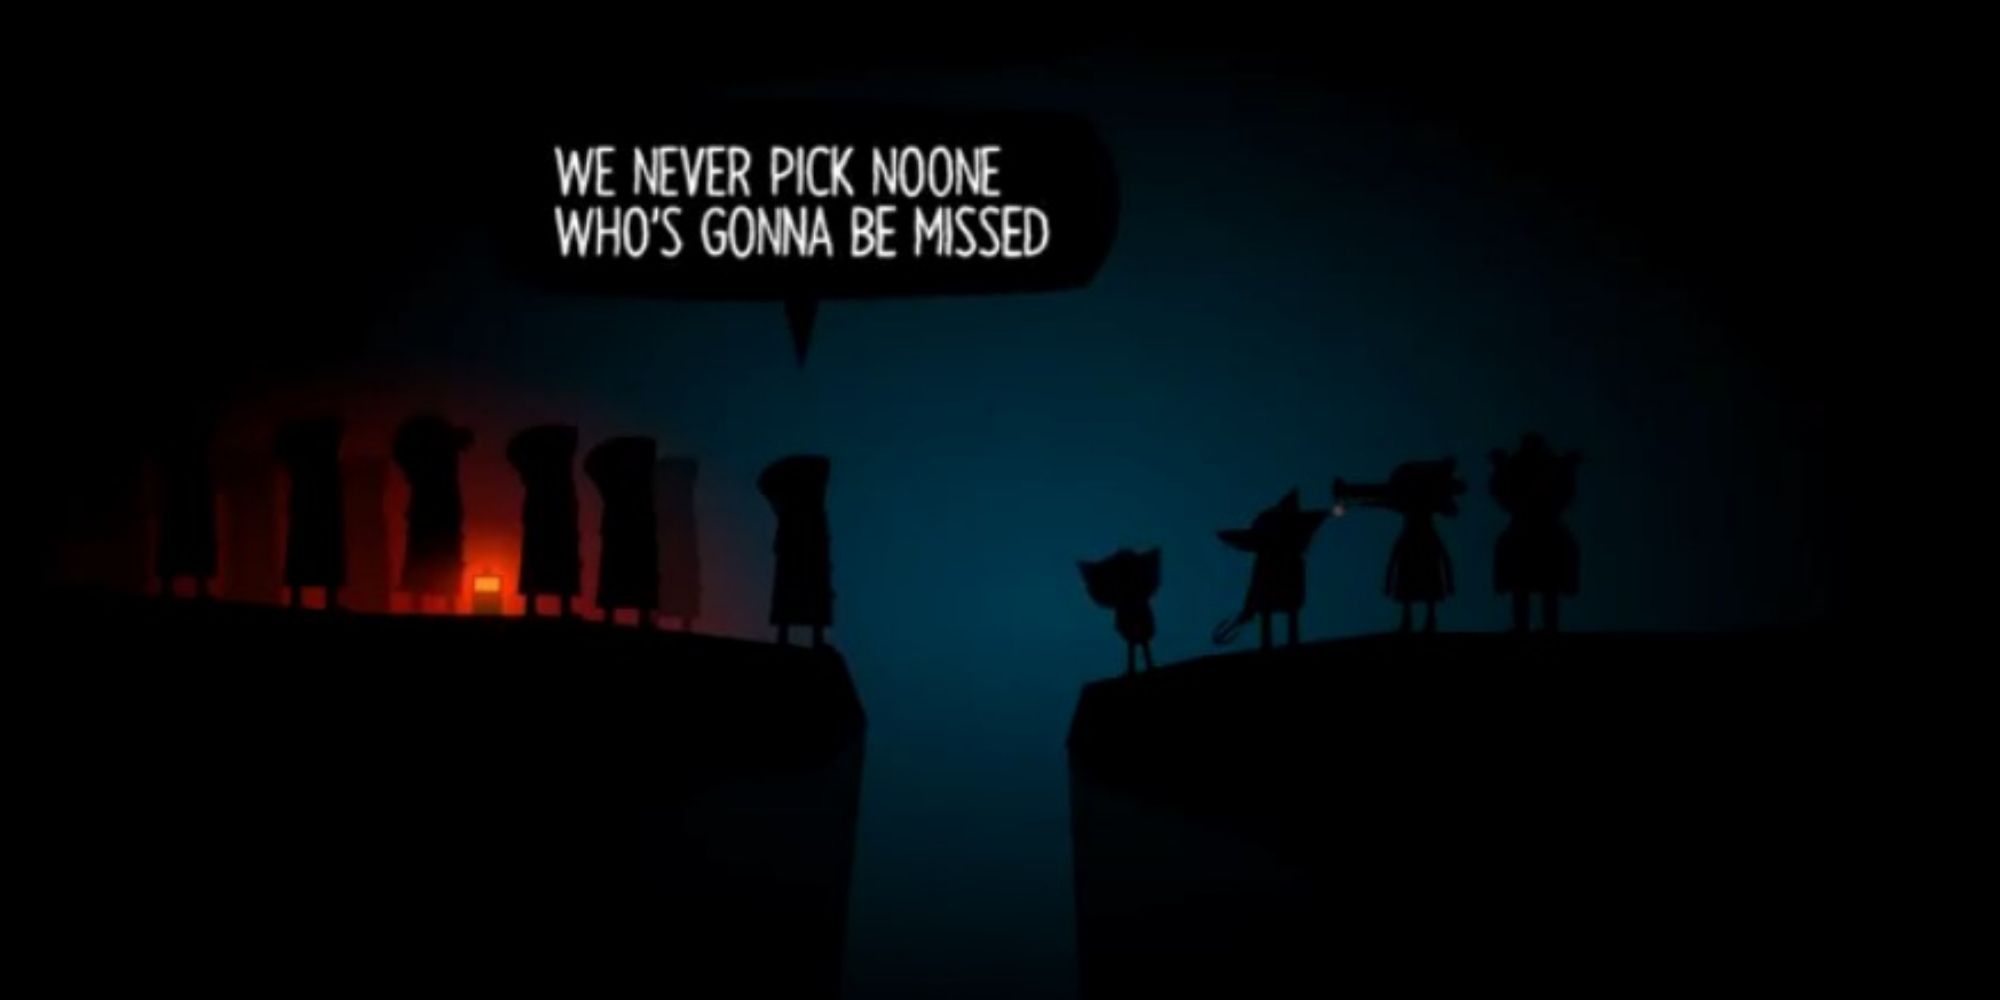 The cult saying "We never pick no one who's gonna be missed." in Night in the Woods.